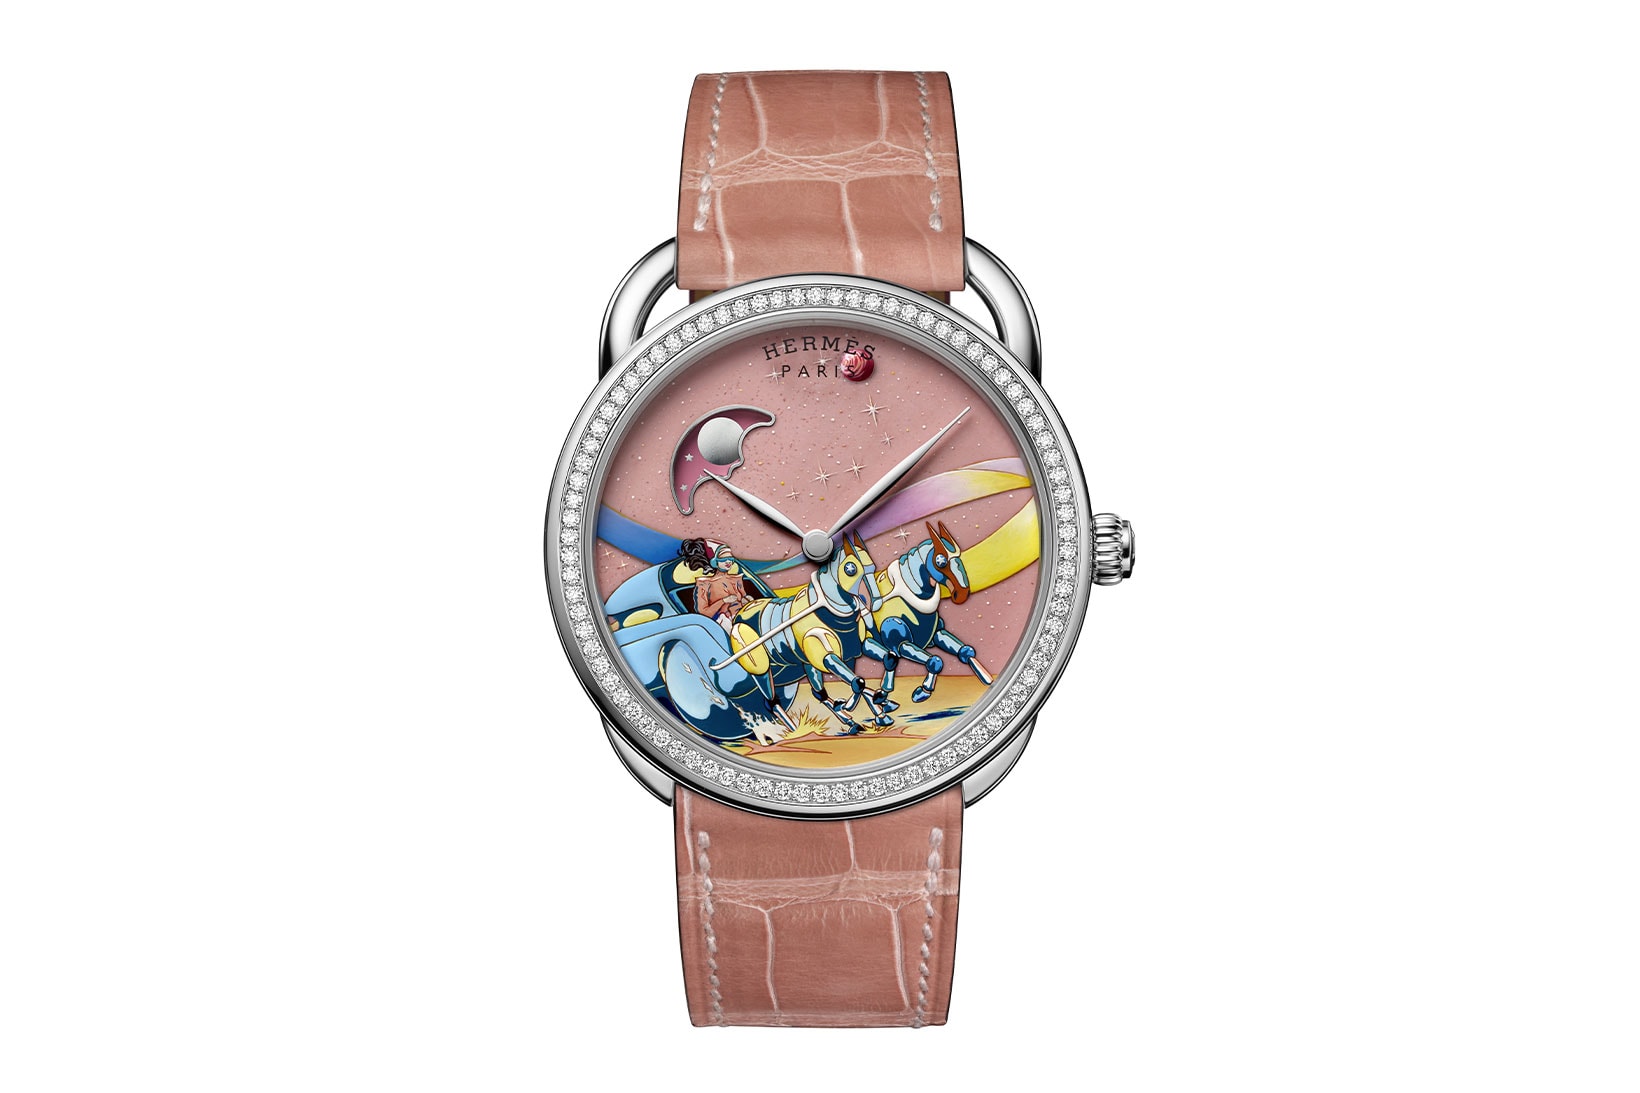 hermes arceau space derby watch timepiece limited edition pink opaline face